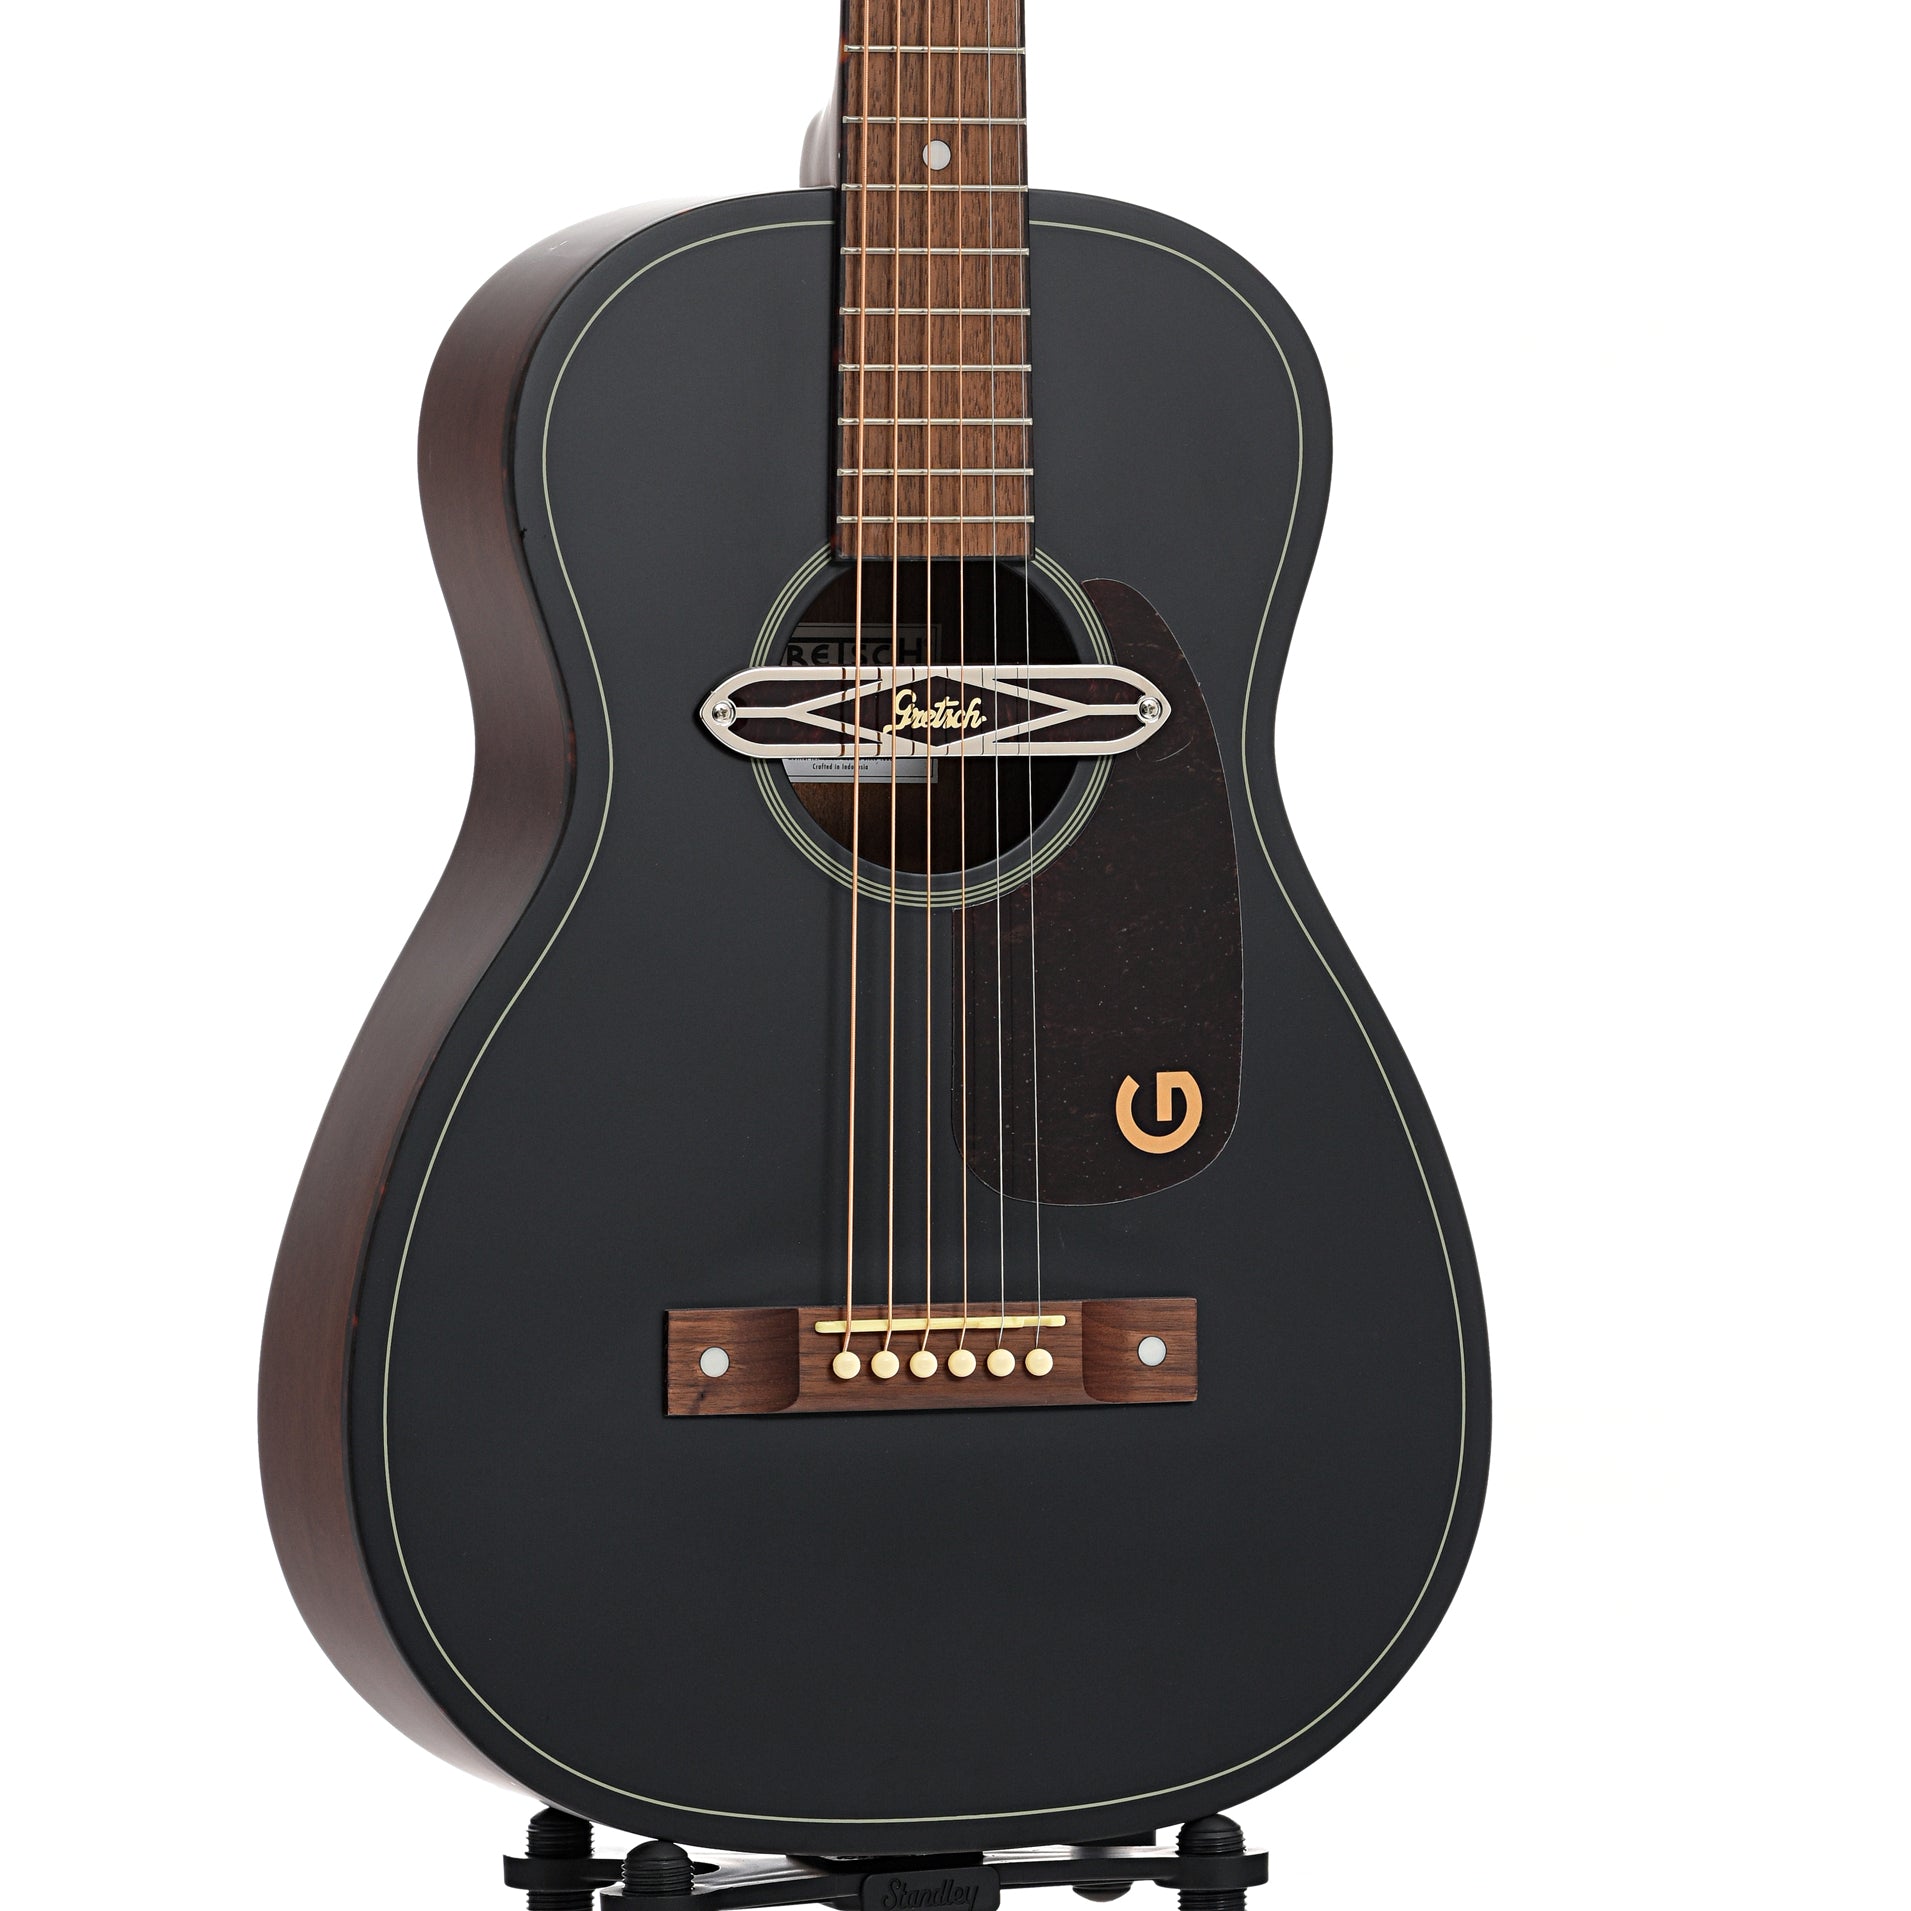 Front and side of Gretsch Jim Dandy Deltoluxe Parlor Acoustic/Electric Guitar, Black Top